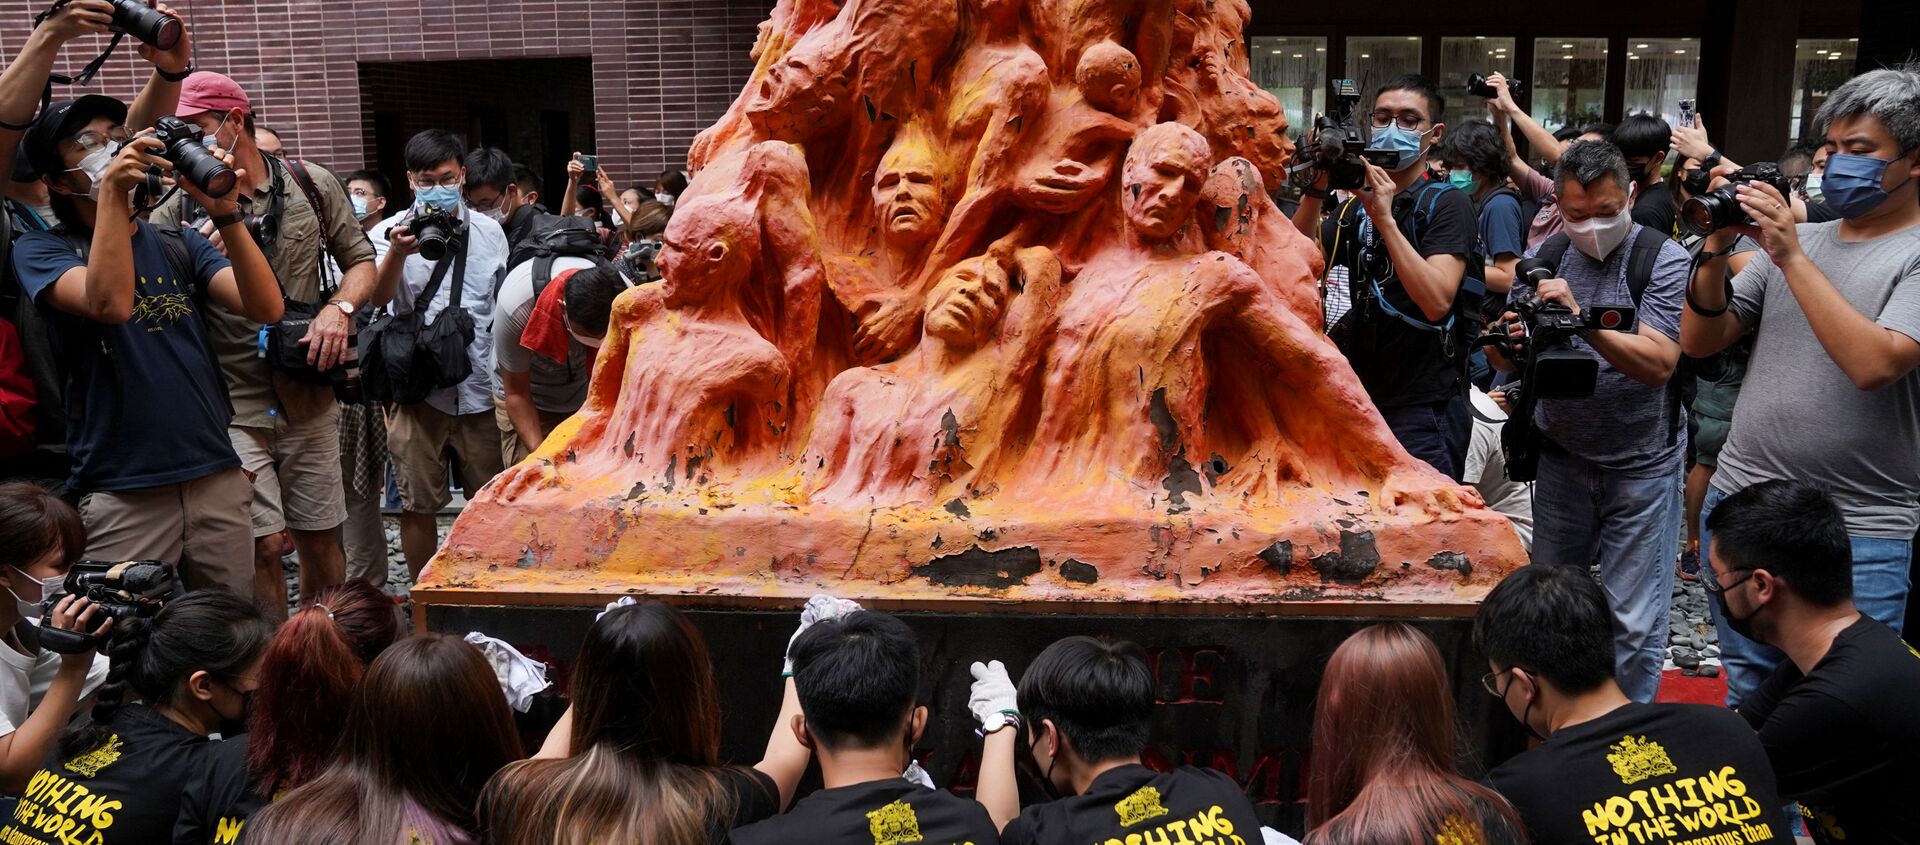 University students clean the Pillar of Shame statue at the University of Hong Kong on the 32nd anniversary of the crackdown on pro-democracy demonstrators at Beijing's Tiananmen Square in 1989, in Hong Kong, China June 4, 2021 - Sputnik International, 1920, 04.06.2021